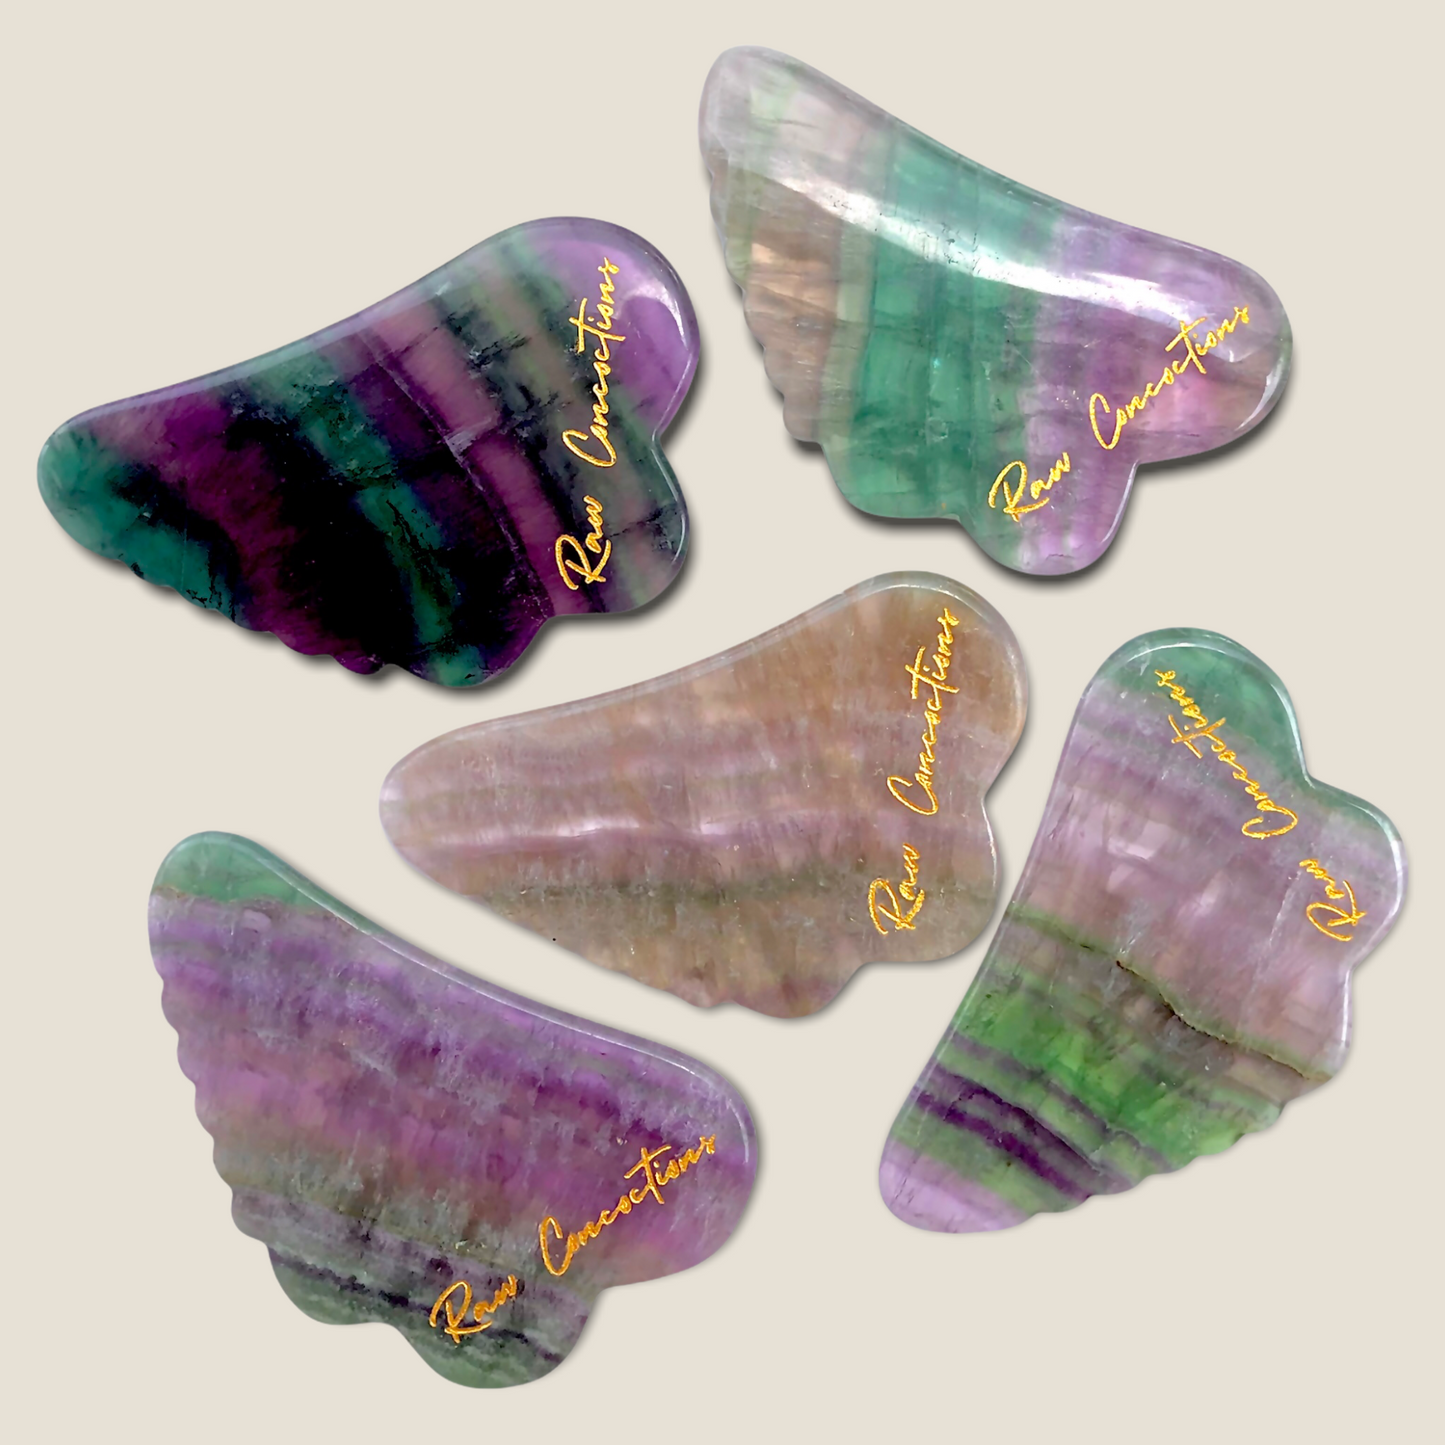 RAINBOW FLUORITE GUA SHA TOOL (With Certificate Of Authenticity) - Raw Concoctions